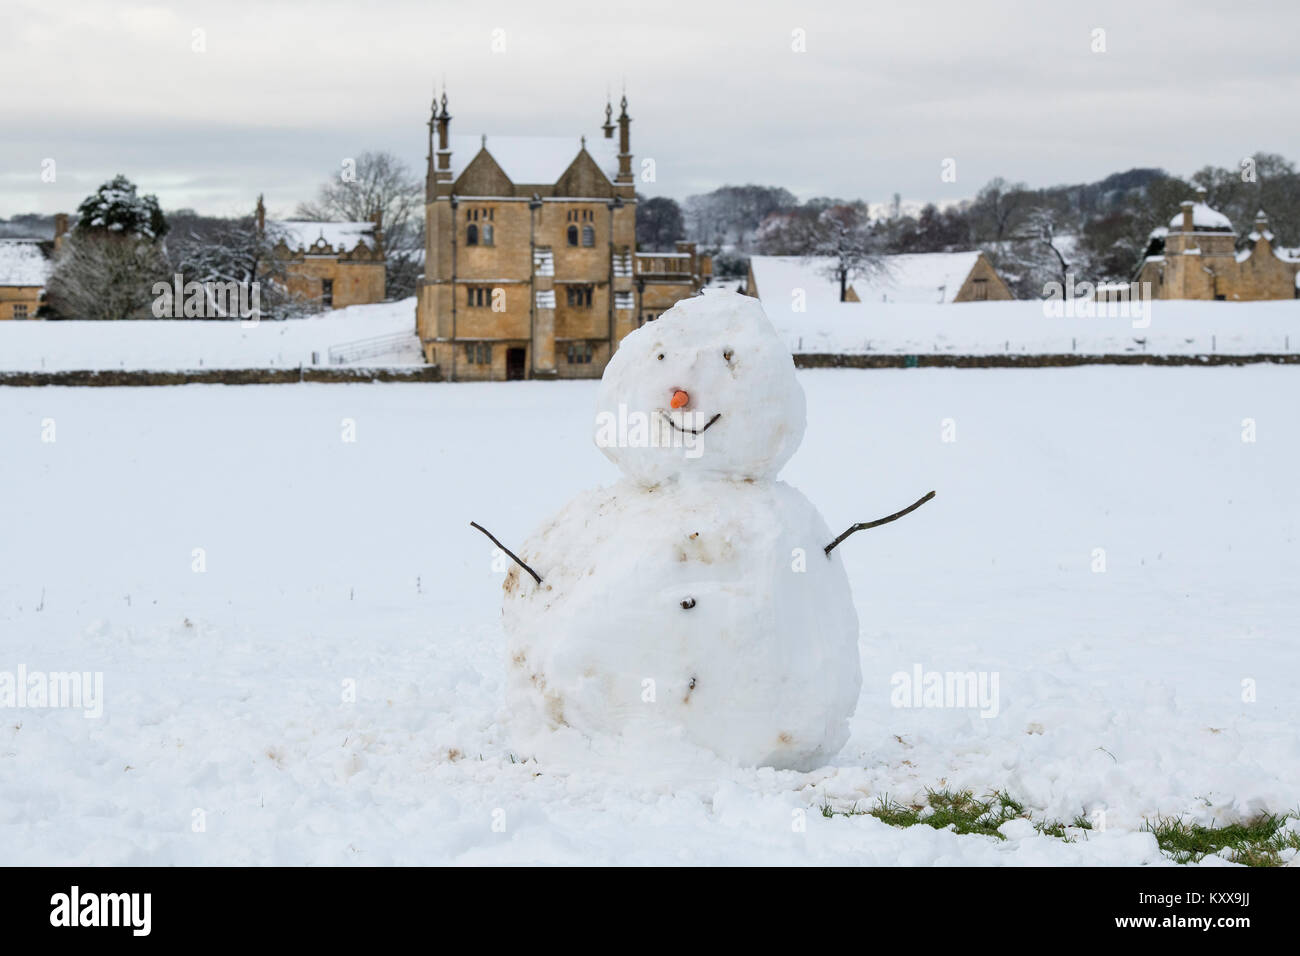 Pupazzo di neve in un campo di fronte est Banqueting House in dicembre. Chipping Campden, Cotswolds, Gloucestershire, Inghilterra Foto Stock